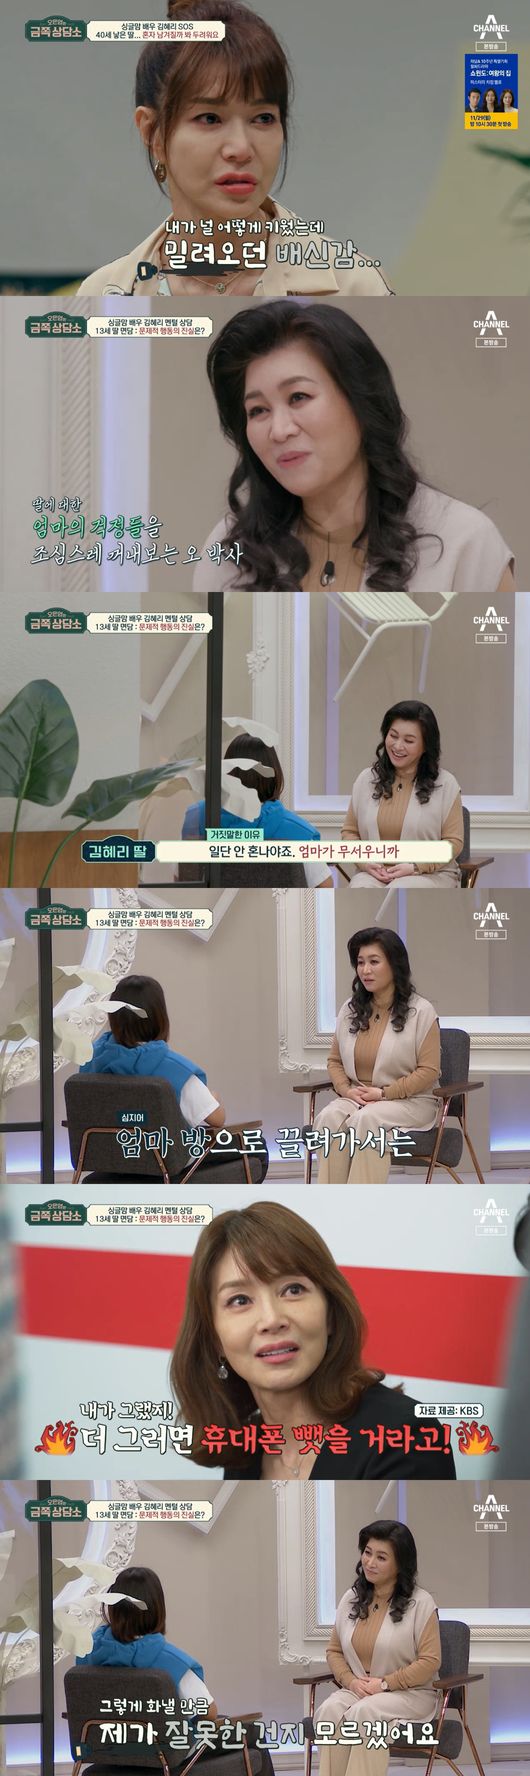 Hye-ri Kim has spoken out about her 13-year-old daughters concerns.On the 19th channel A Oh Eun-youngs Gold Counseling Center, Actor Hye-ri Kim talked about his 13-year-old daughters troubles and difficulties.On the day Hye-ri Kim said, I got married late and had a child at forty.I am a daughter who is so precious to me, so I am raising it hard. I have been fighting my daughter for a long time.The child seems to be changing a little bit strangely and I do not know what to do. Hye-ri Kim said, What was she doing in the room alone? I went in and she was wearing makeup. One day she was pushing her eyebrows and bleaching her bangs.I asked him why, and he said he just wanted to try. I am worried because I do not do it. Hye-ri Kim said: When you talk to me, you lie. When you ask if youre on your cell phone, you were looking at your homework.I do not know why I lie first, he said. In the past, the child who was still still is called Nue. On this day, a guest appeared to oppose Hye-ri Kim: Park Ye-eun, daughter of Hye-ri Kim.Oh Eun Young said, I was curious about Park Ye-euns thoughts and minds, he said. I told you I had a lot of fights with my mother.My mom says theres a lot of conflict, but I dont think of conflict, Park Ye-eun said, followed by Oh Eun Young, who said, She thought she was lying.Why is that? asked Park Ye-eun, who said, My mother is angry and angry, not trying to get hurt.Park Ye-eun said, I was doing my homework while watching movies, and my mother said that you were watching movies all the time.I took my cell phone and threw all my things away and told me to go out, he said. I do not know why my mother is doing it and I often hate it.I heard that my mother said that she had dark makeup and bleached, said Jeong Hyeong-don.Park Ye-eun laughed, saying, People may do that.Park Ye-eun then looked at Oh Eun Young and said, Its like a teachers bodhisattva.Hye-ri Kim said, Thats what Im angry about. My mothers heart is hard, but I have no idea. I think its not hard.It is a small thing, but why do not you do it, but it is angry because it is a small thing every day. Oh Eun Young said, The problem is deep.Oh Eun Young said, I do not understand the childs mind, but I have to change my perception. My mother needs to raise it properly, so there is a growing conflict because she wants something.On this day, Oh Eun Young advised Hye-ri Kim about the adult separation anxiety and explained how.